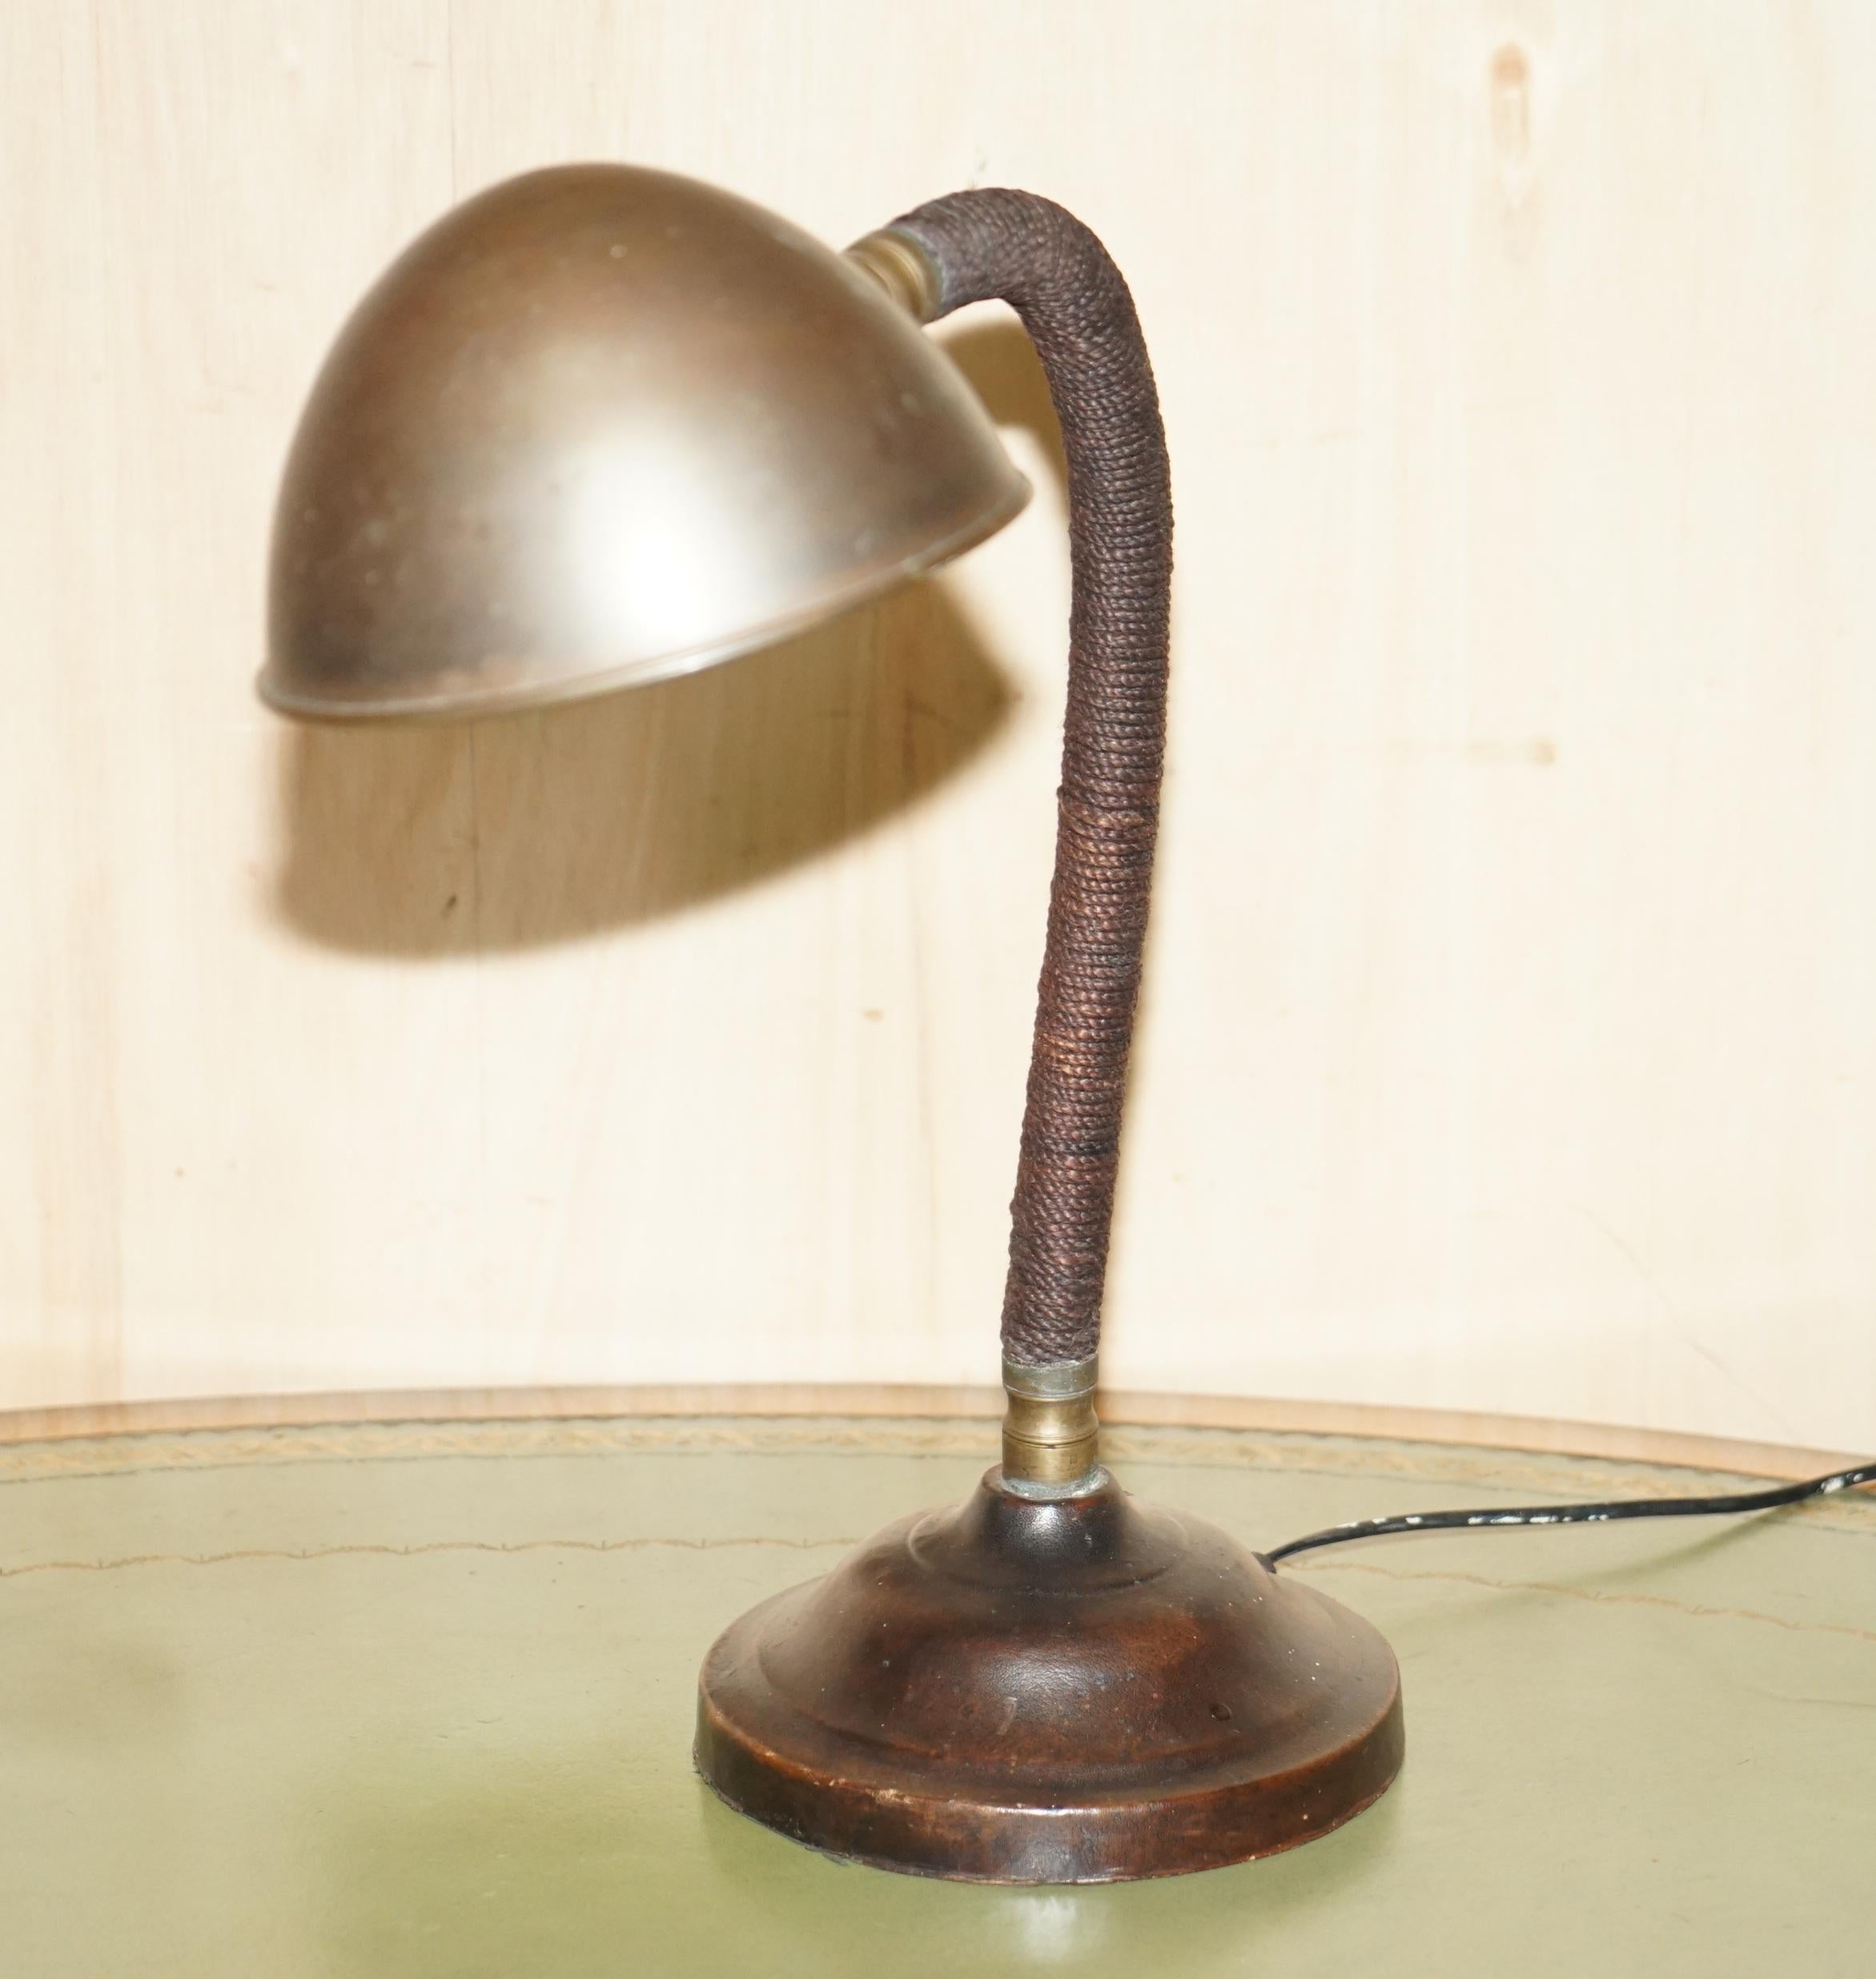 We are delighted to offer for sale this stunning vintage brass with bronzed finish Art Deco bankers lamp circa 1930 with hand stitched leather base and rope woven body

A very good looking and decorative piece, I've never seen one this size